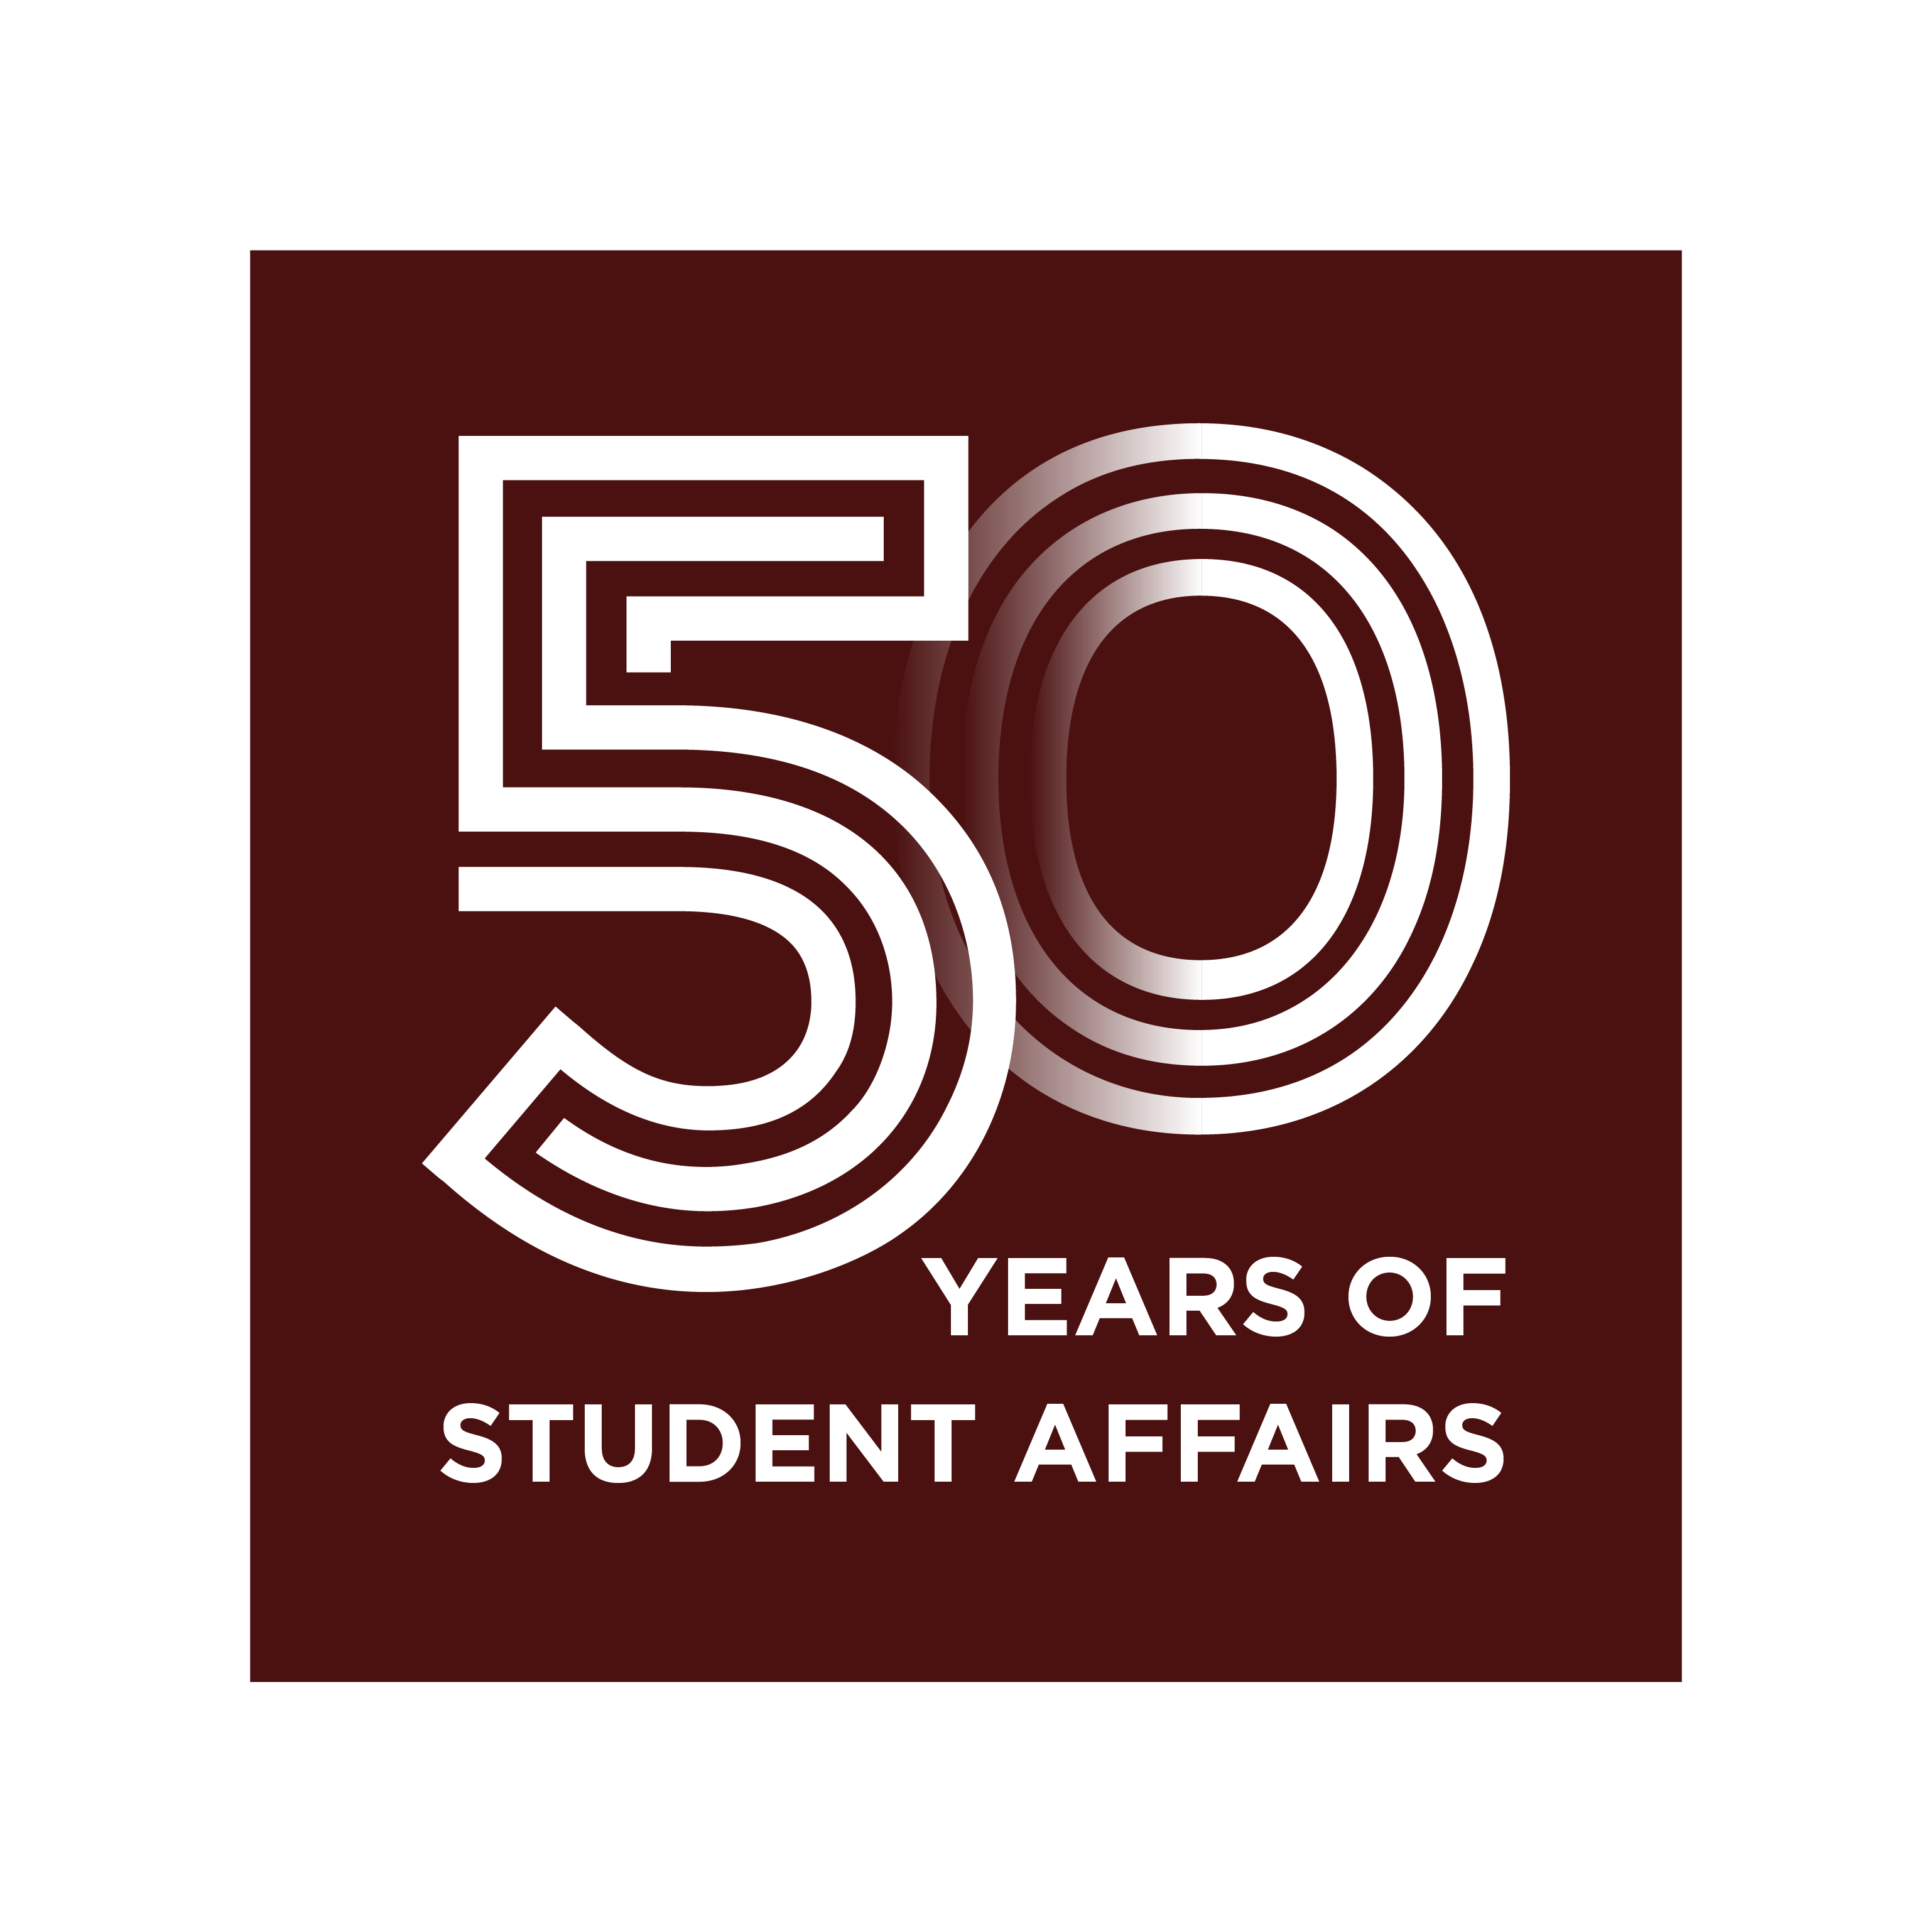 50 years of Student Affairs